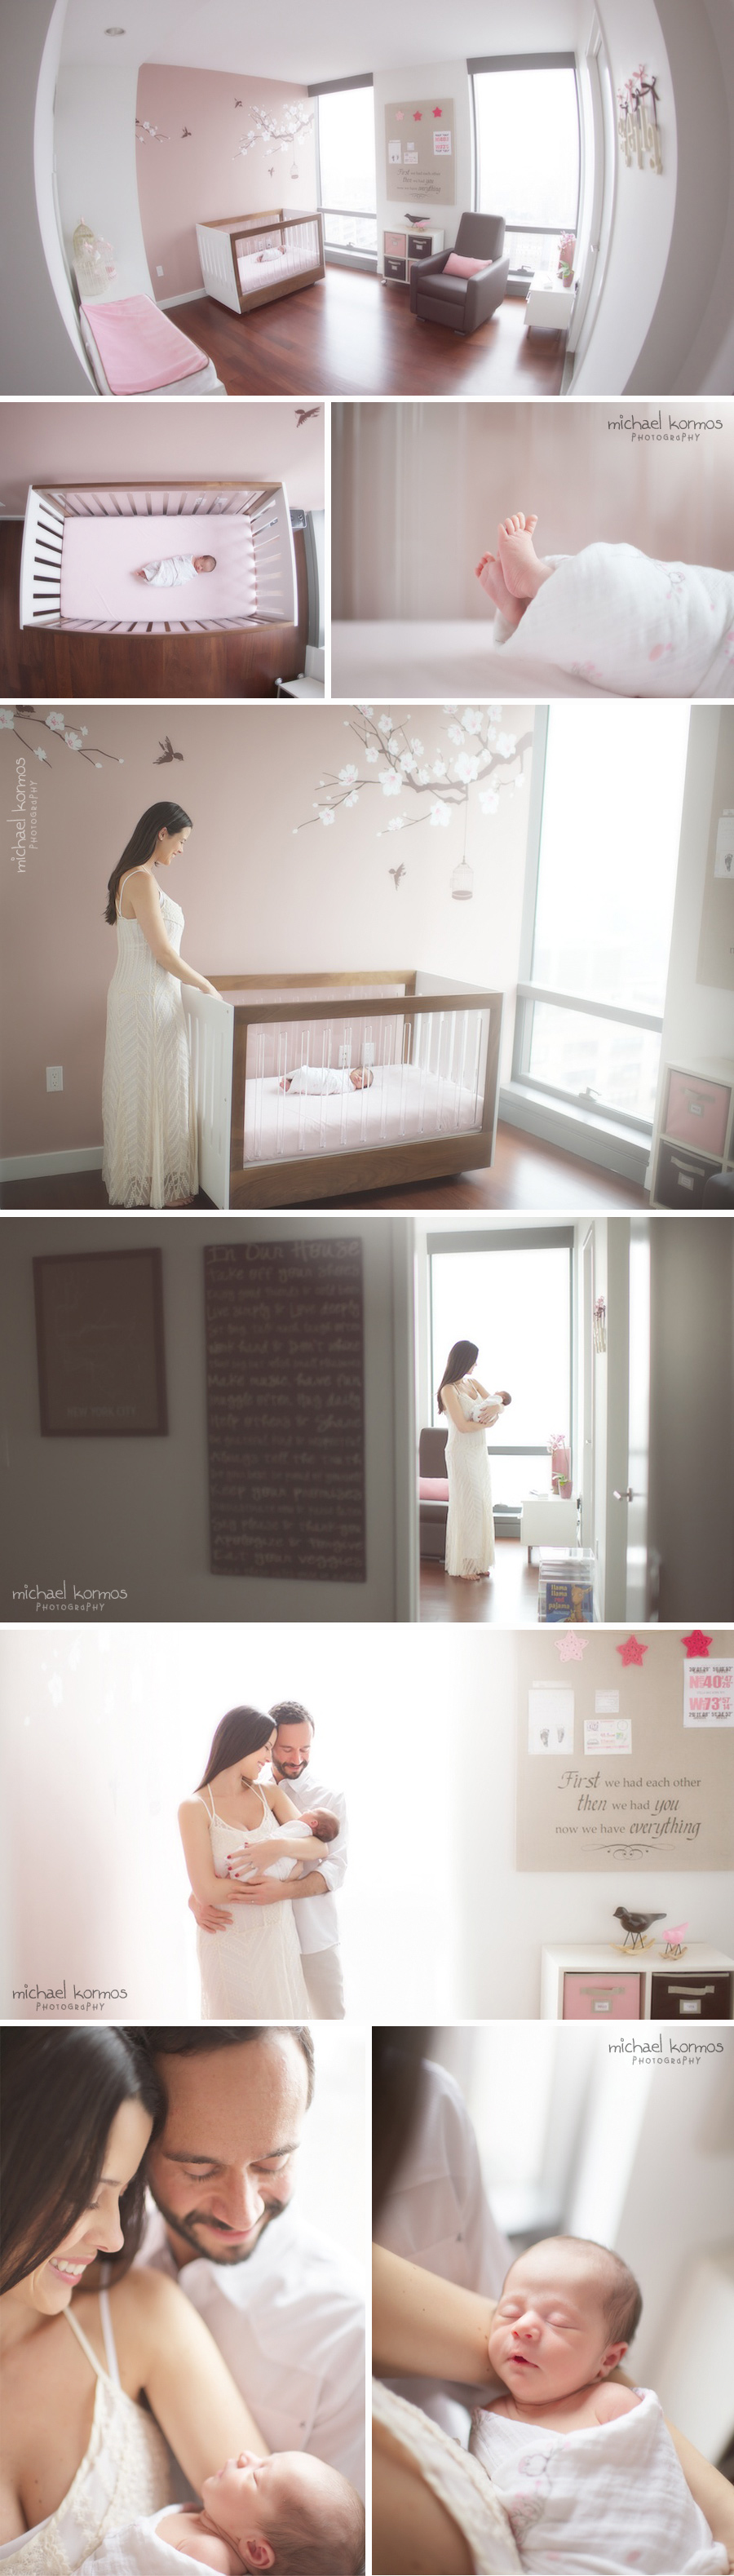 Beautifully decorated nursery with gorgeous wall mural is the perfect setting for comfortable and intimate newborn photography that is filled with emotions